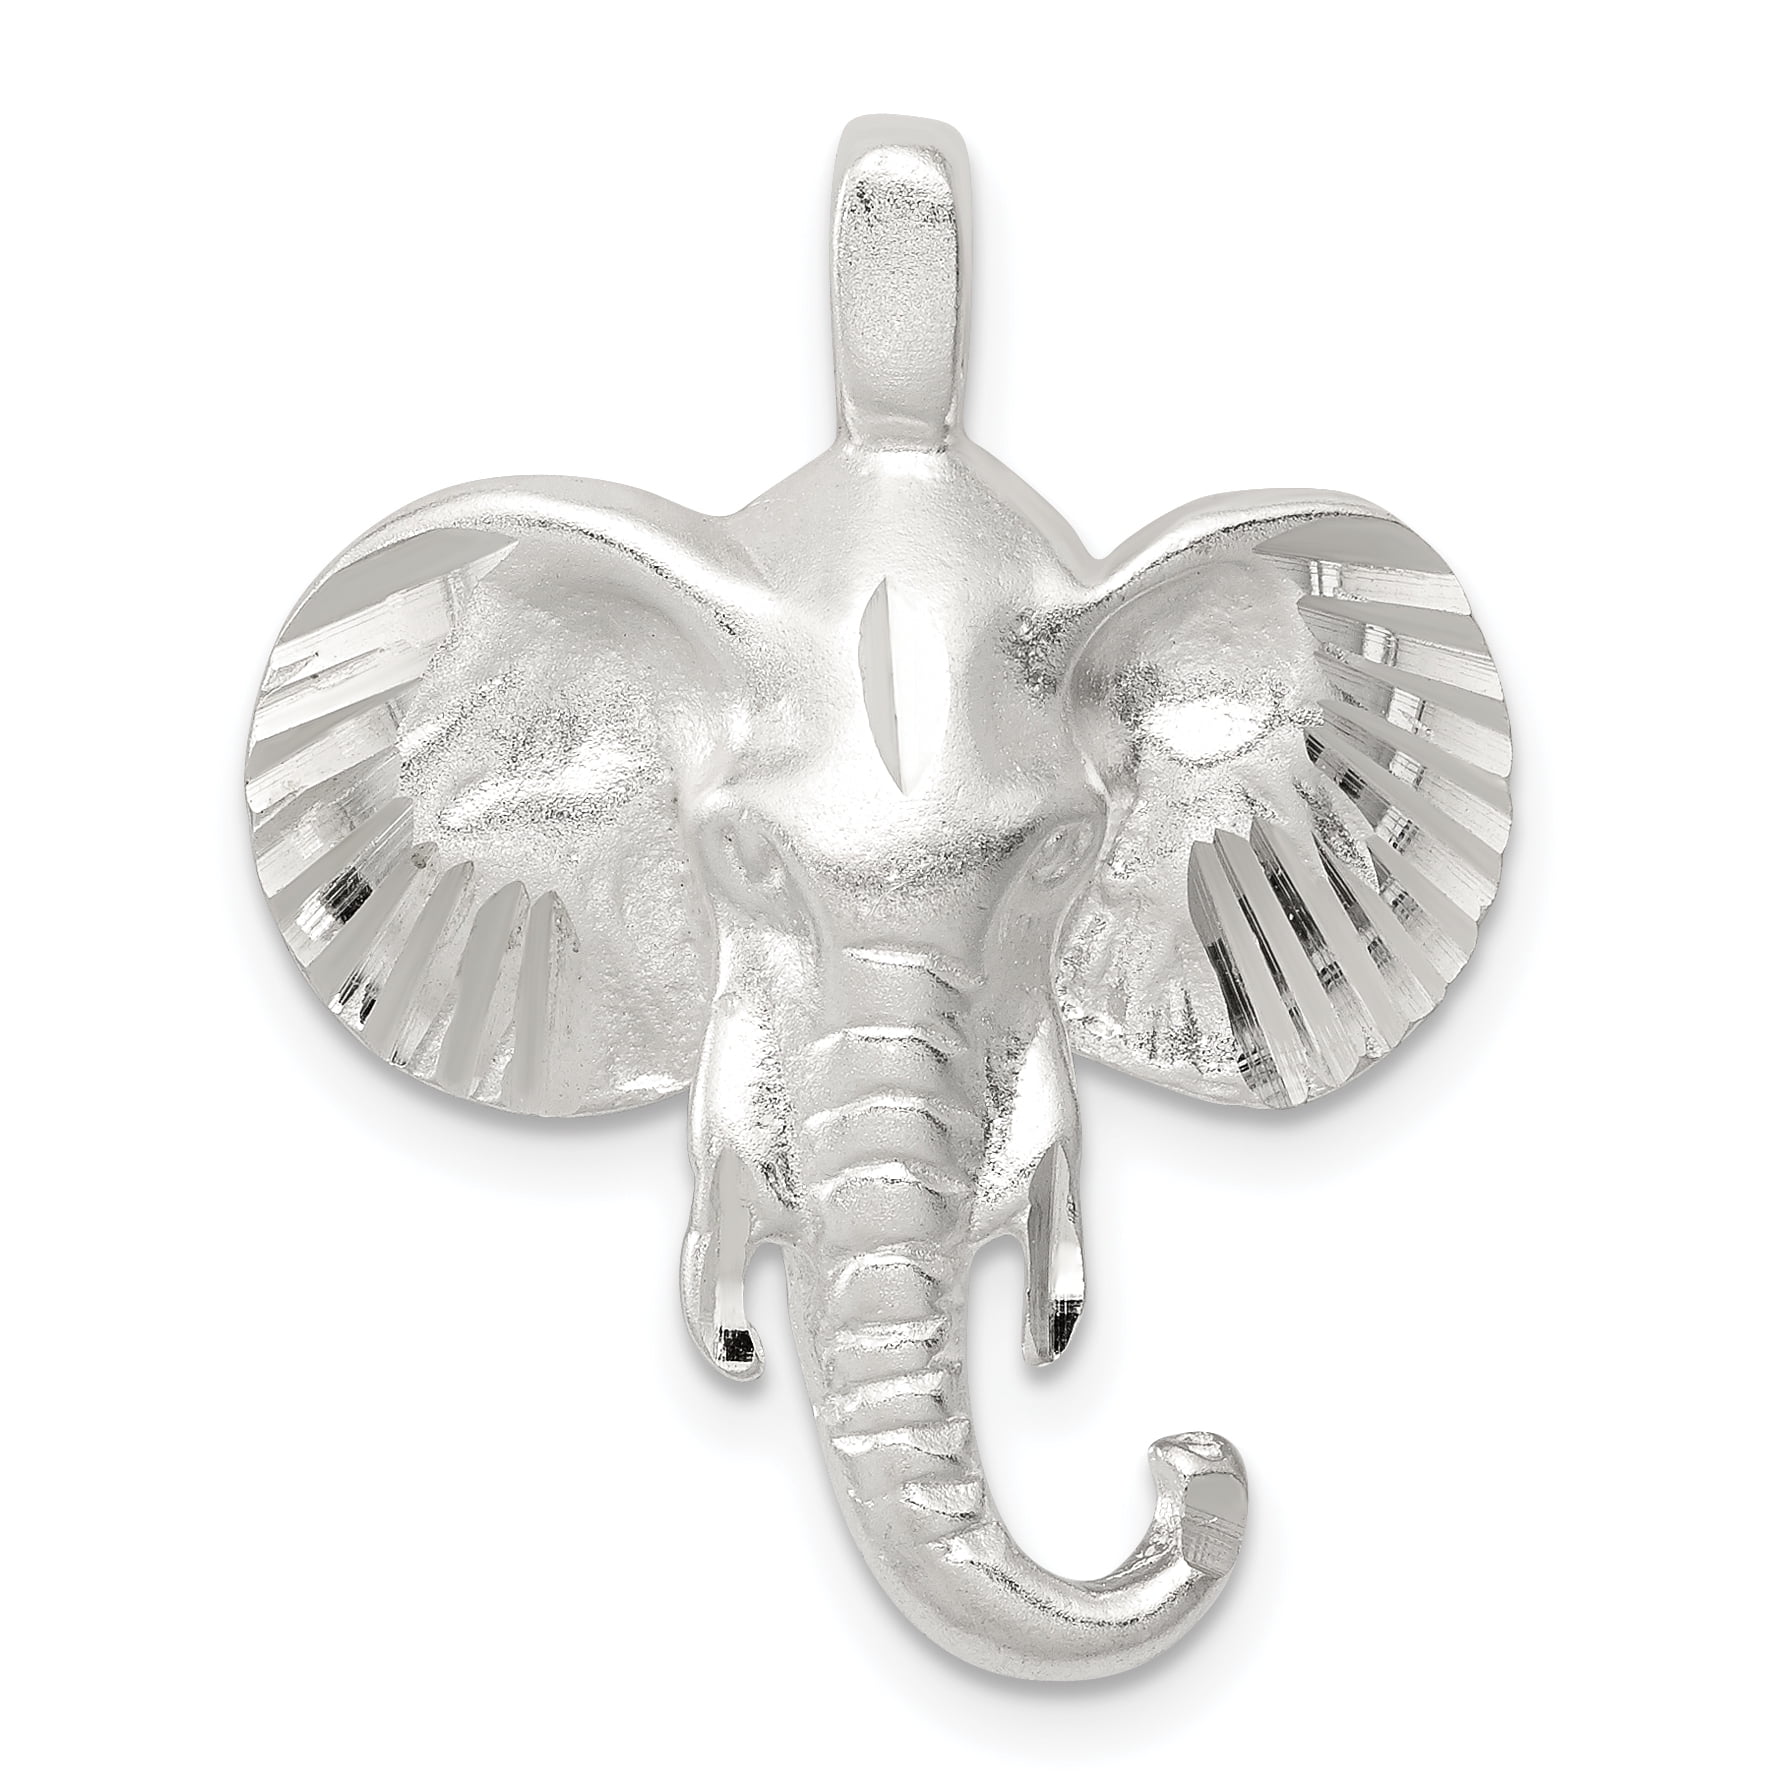 925 Sterling Silver Elephant Charm Pendant for Necklace 